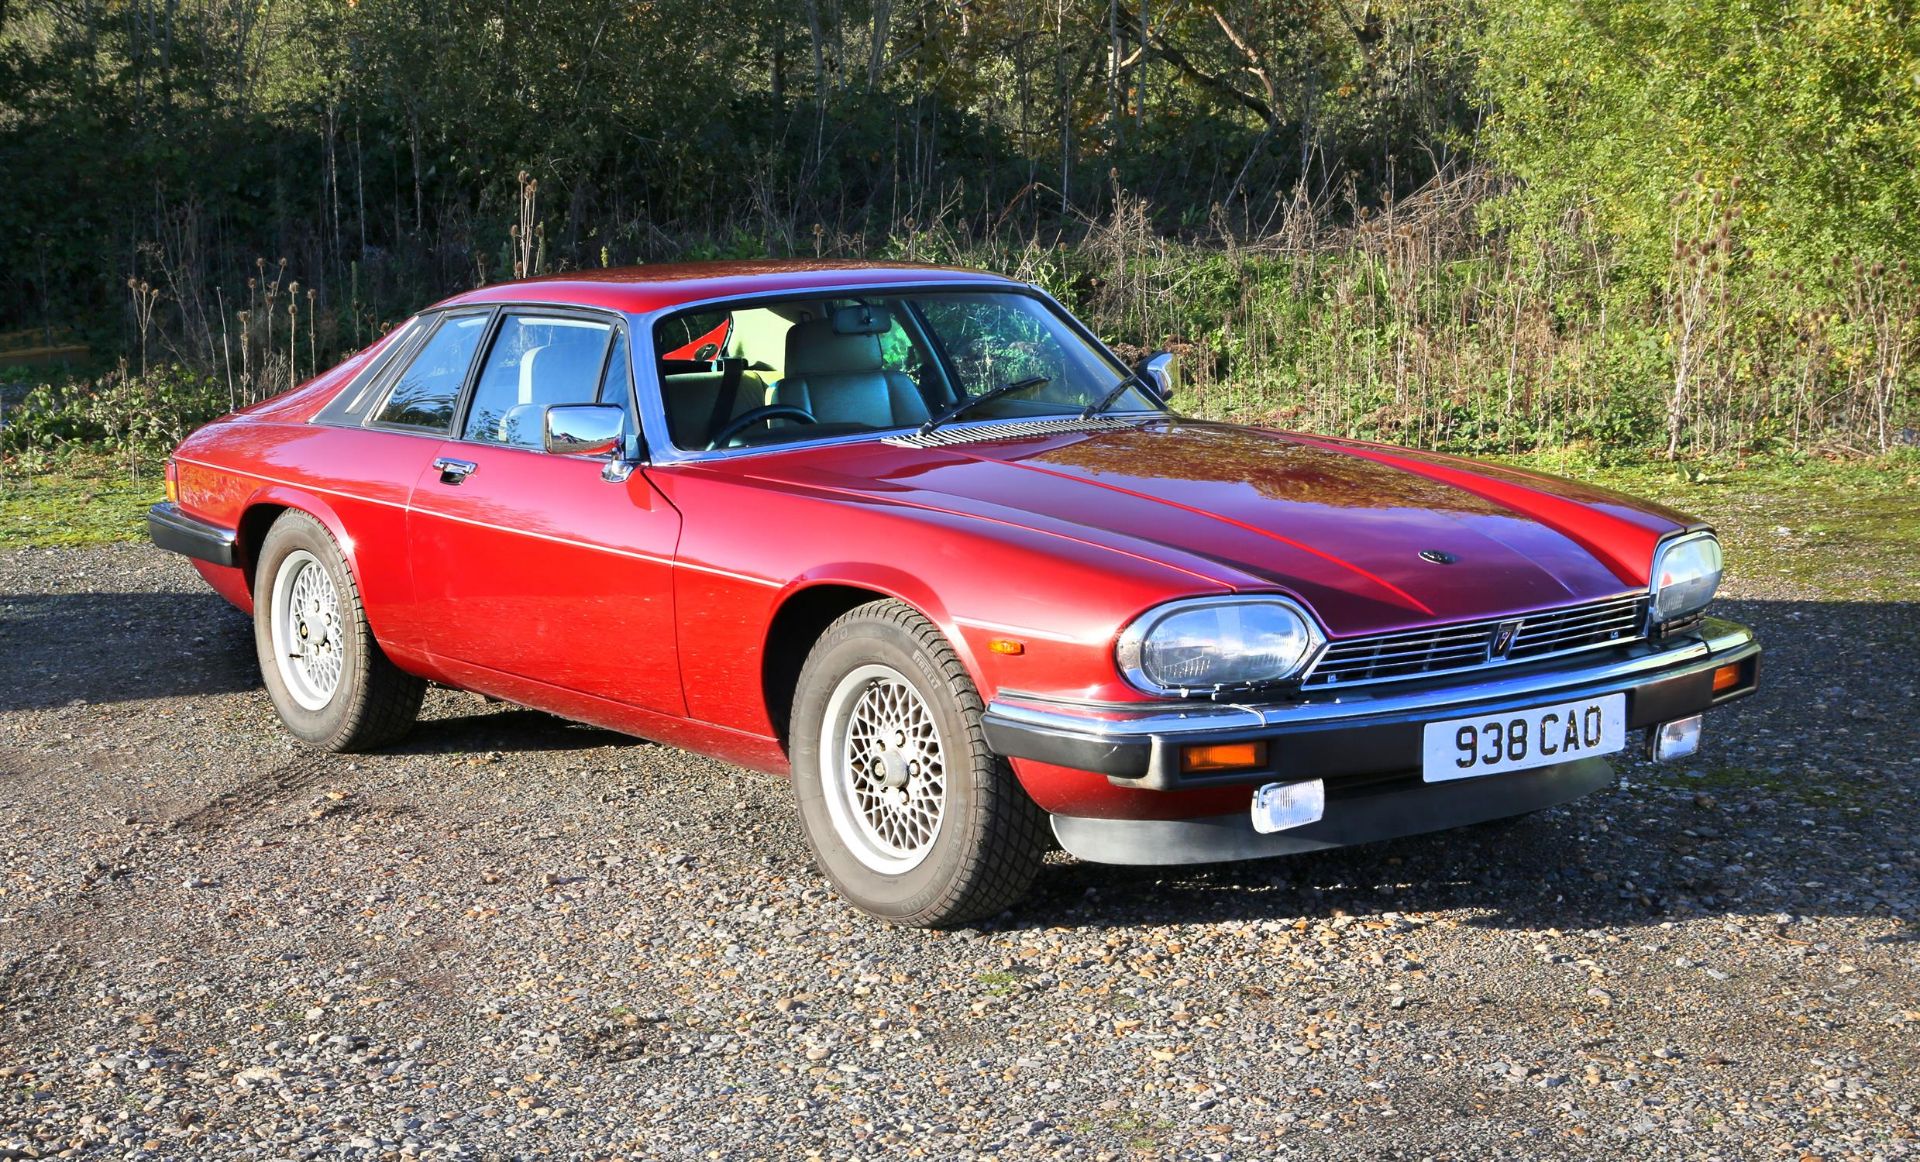 1989 Jaguar XJ-S 5.3 V12 Automatic. - Genuine 33,000 miles from new. - Only two lady owners -